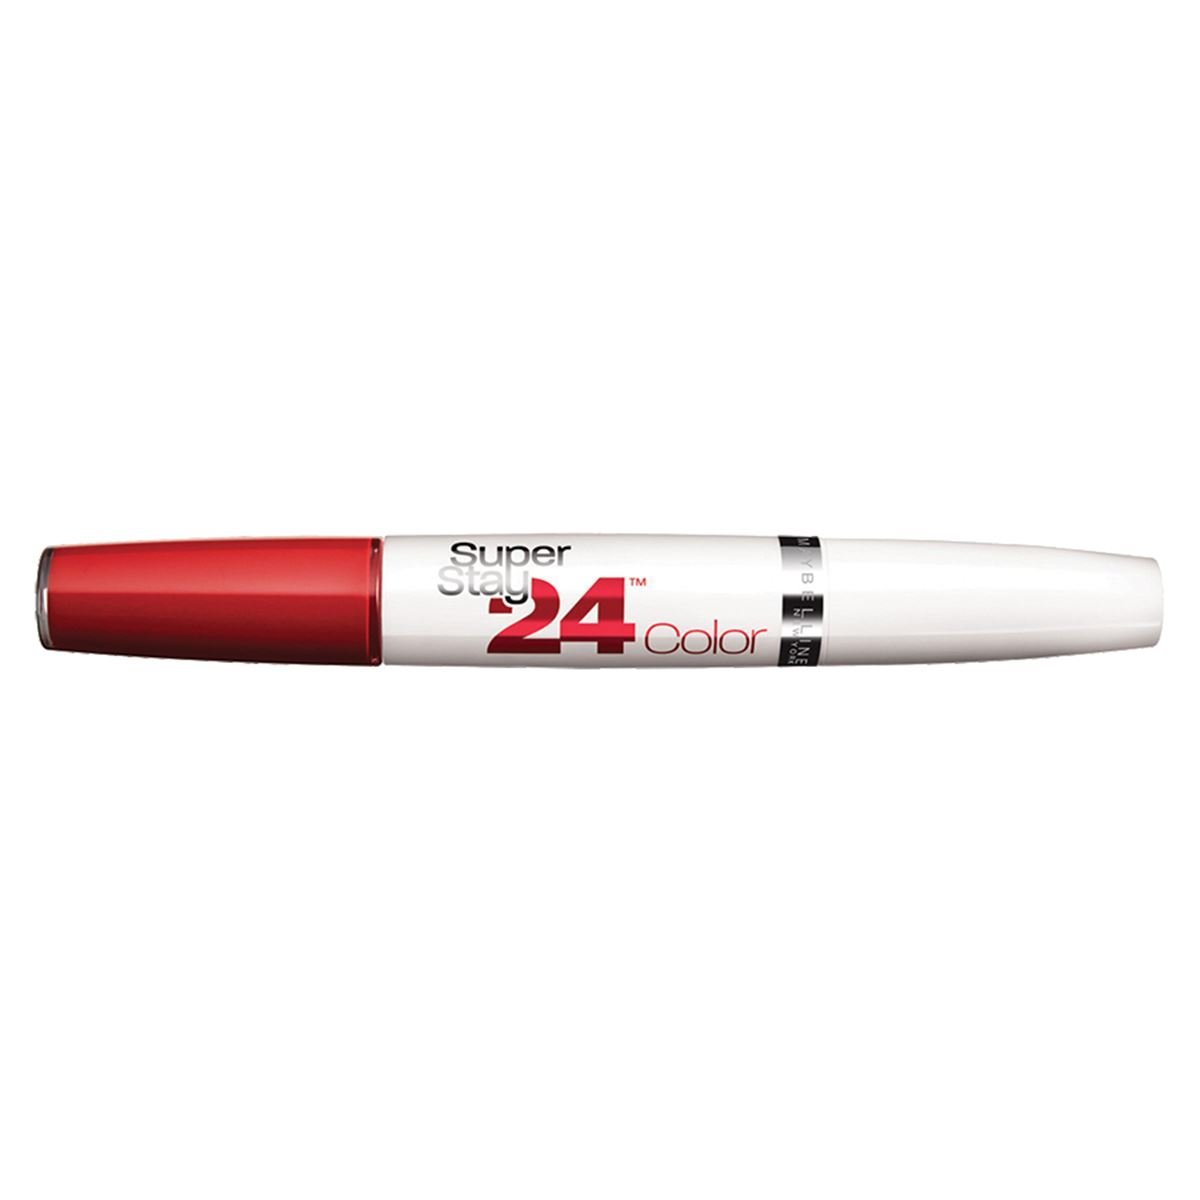 Superstay 24 Lipcolor Red Passion Sb